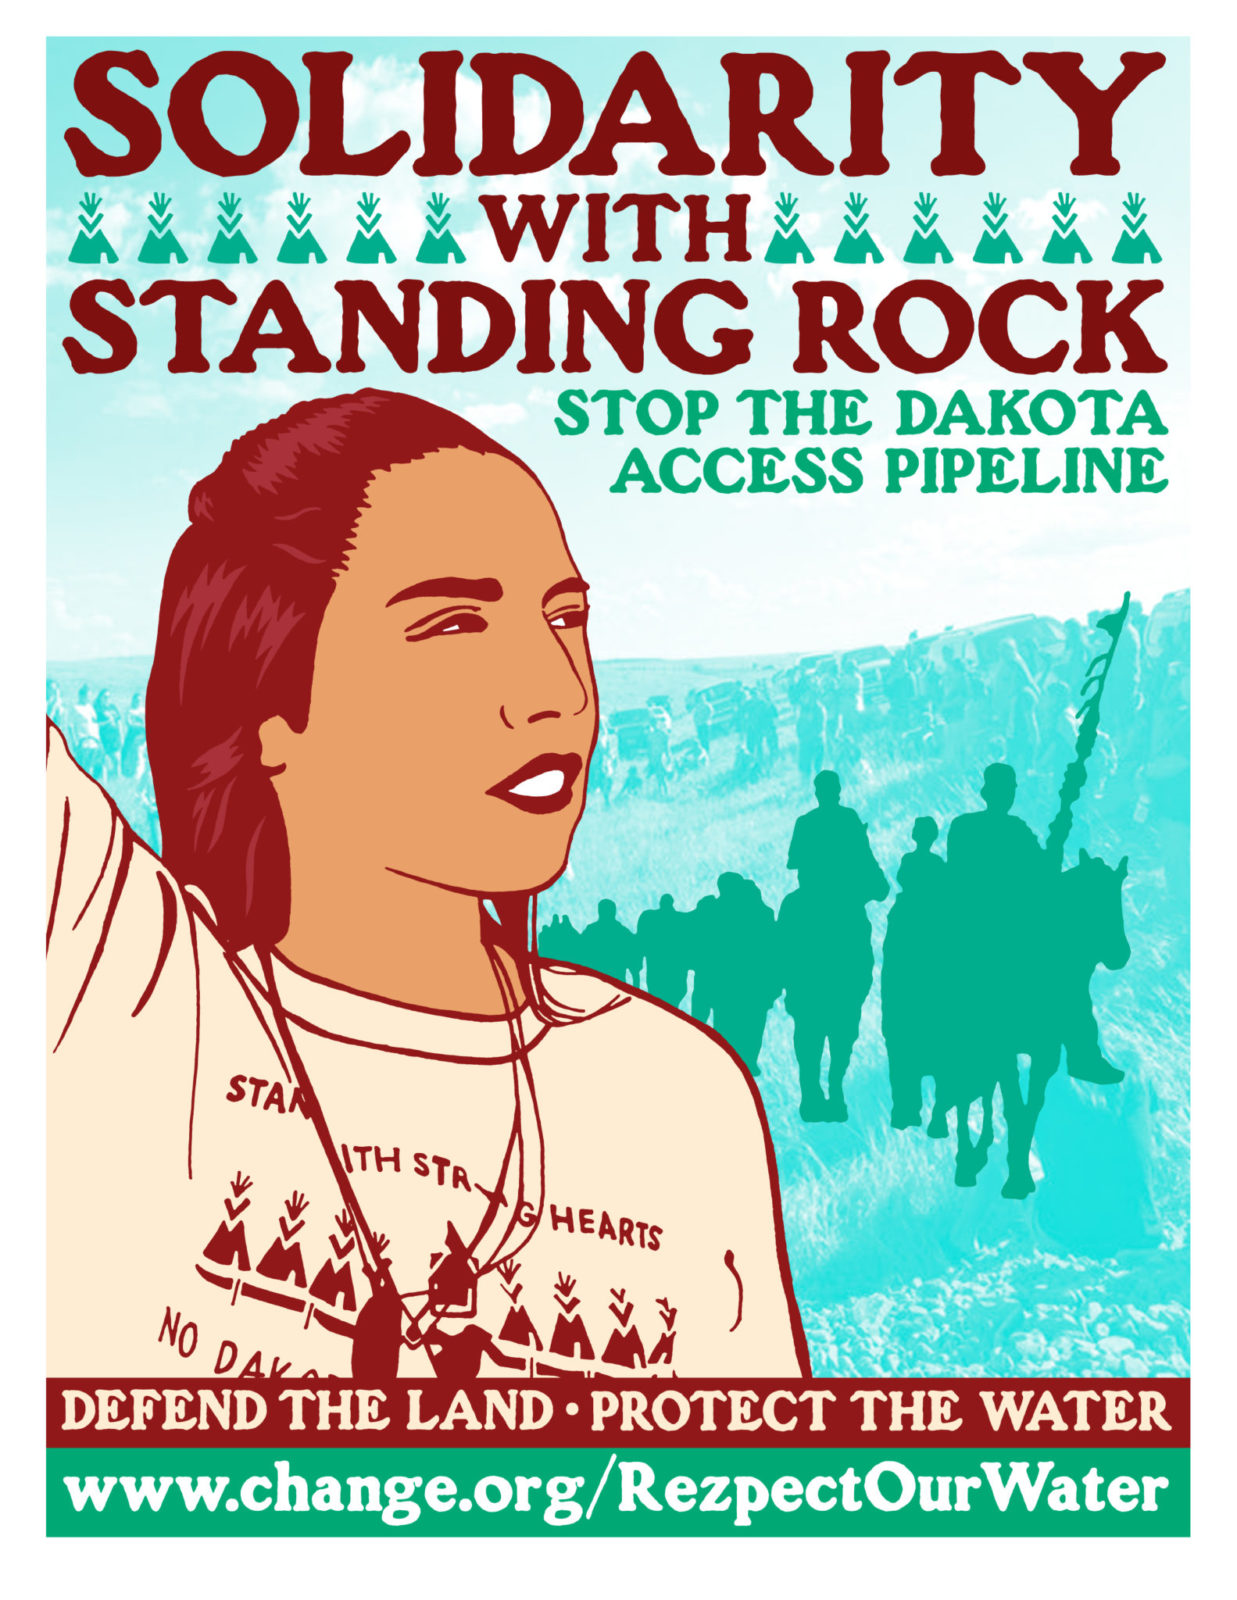 Donation to Standing Rock Small Business Coupon Code